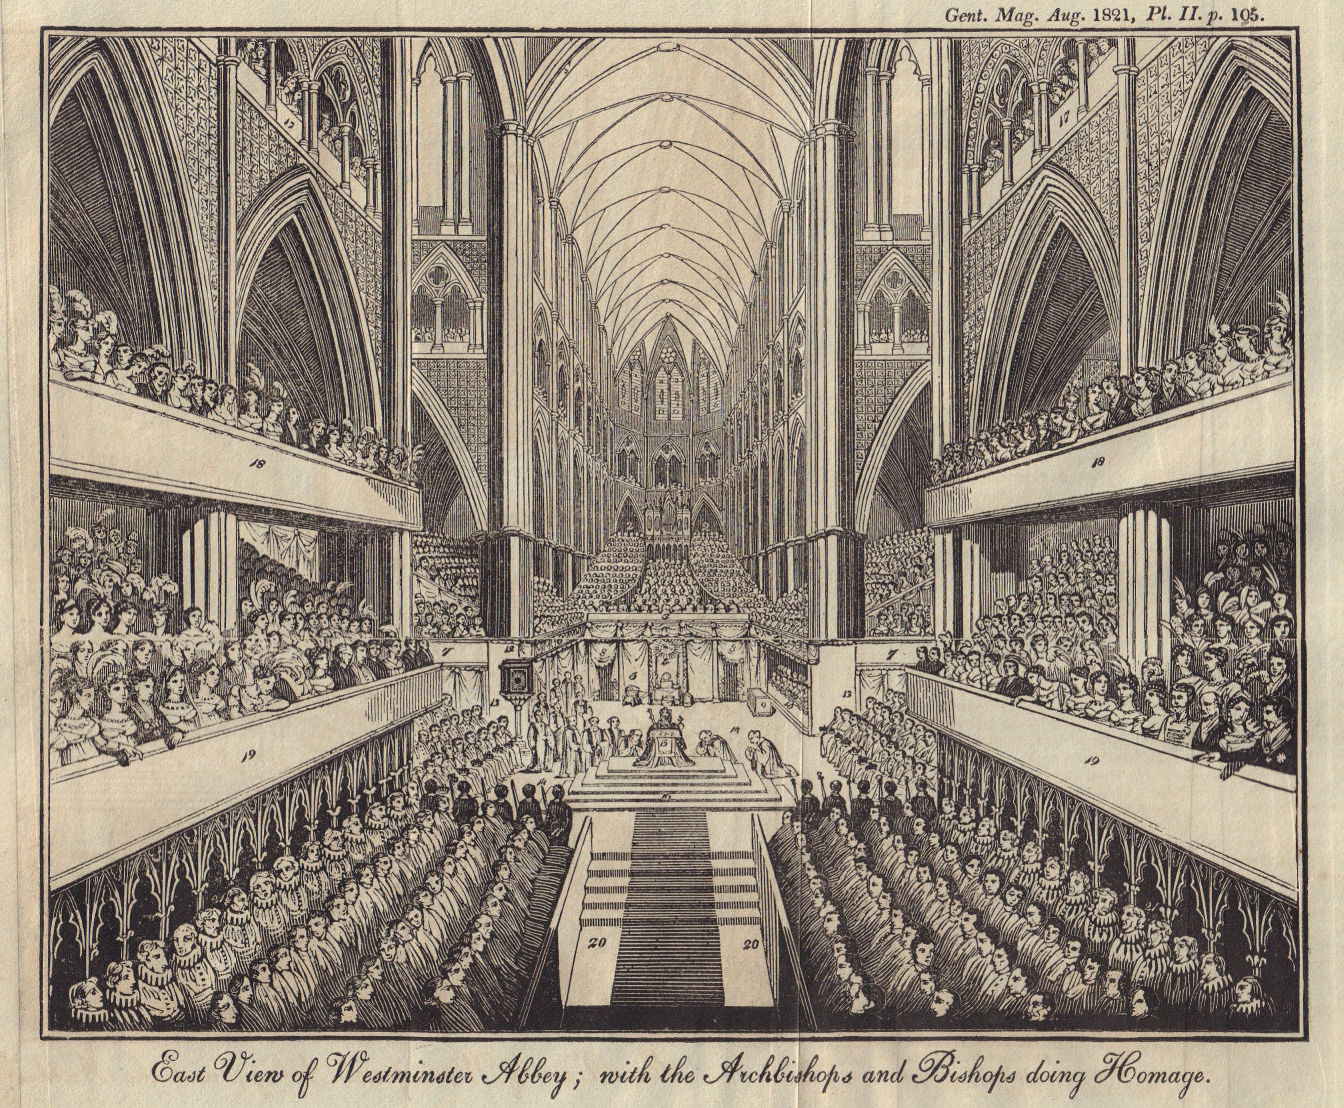 Associate Product Westminster Abbey George IV Coronation 1821. Archbishops paying homage 1821